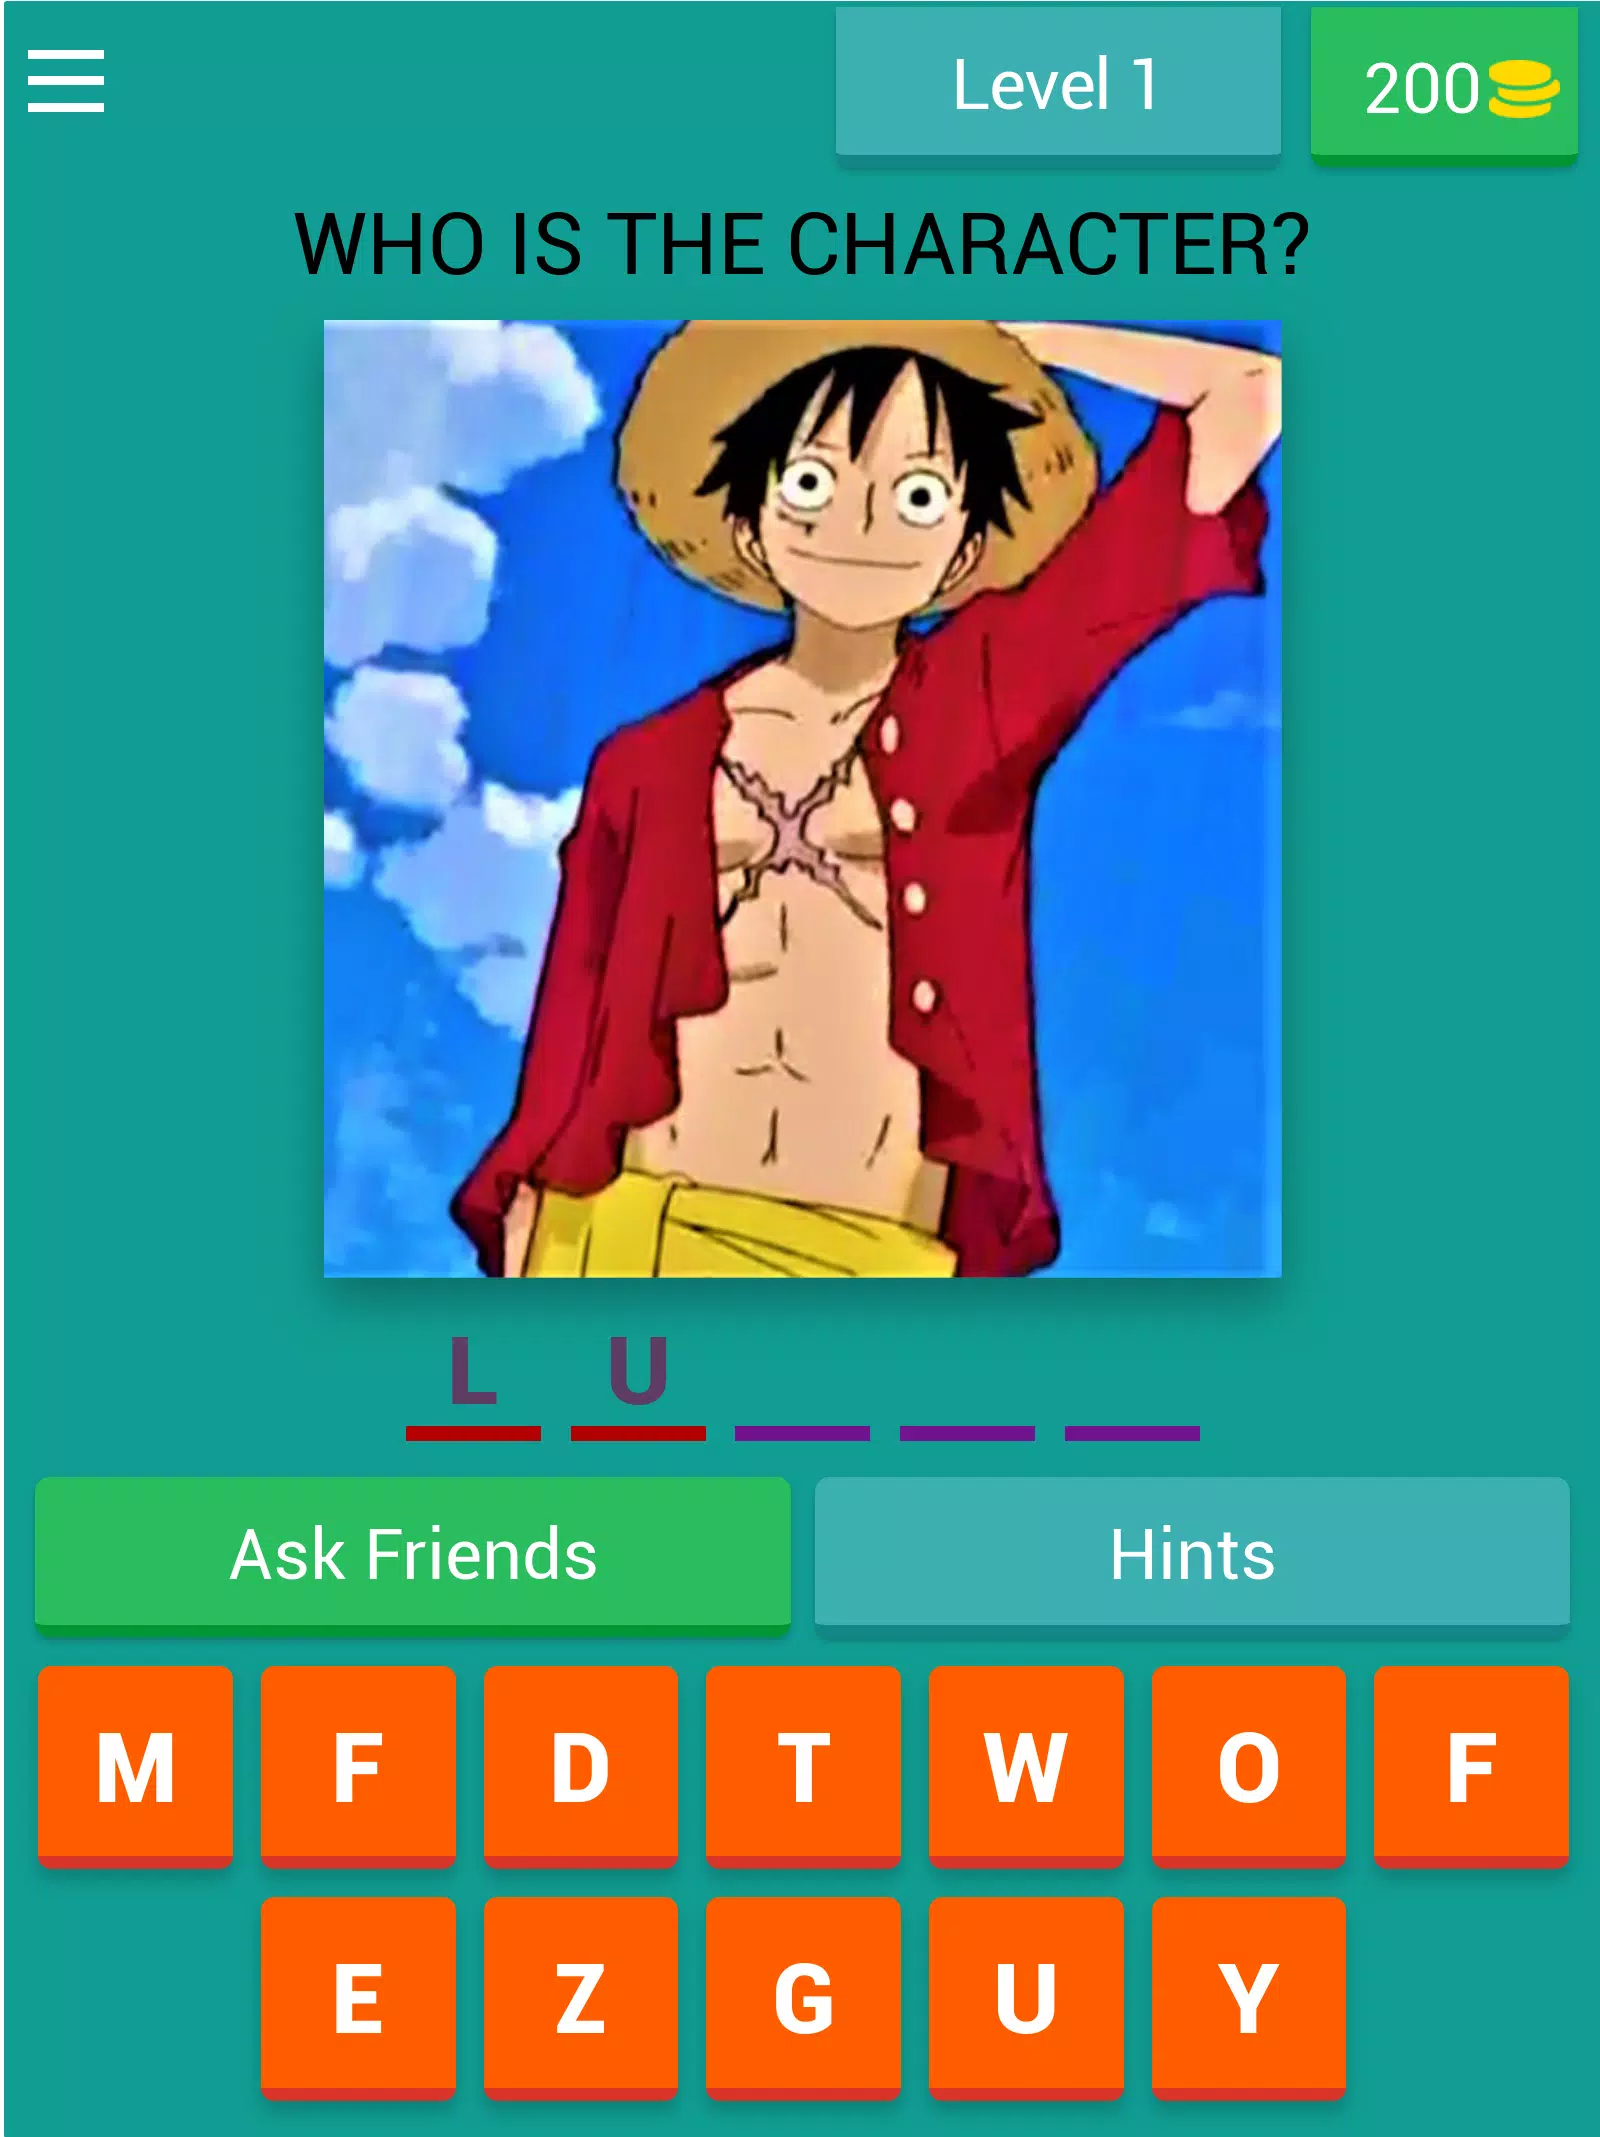 THE ULTIMATE ONE PIECE QUIZ (with EASY to HARDCORE QUESTIONS